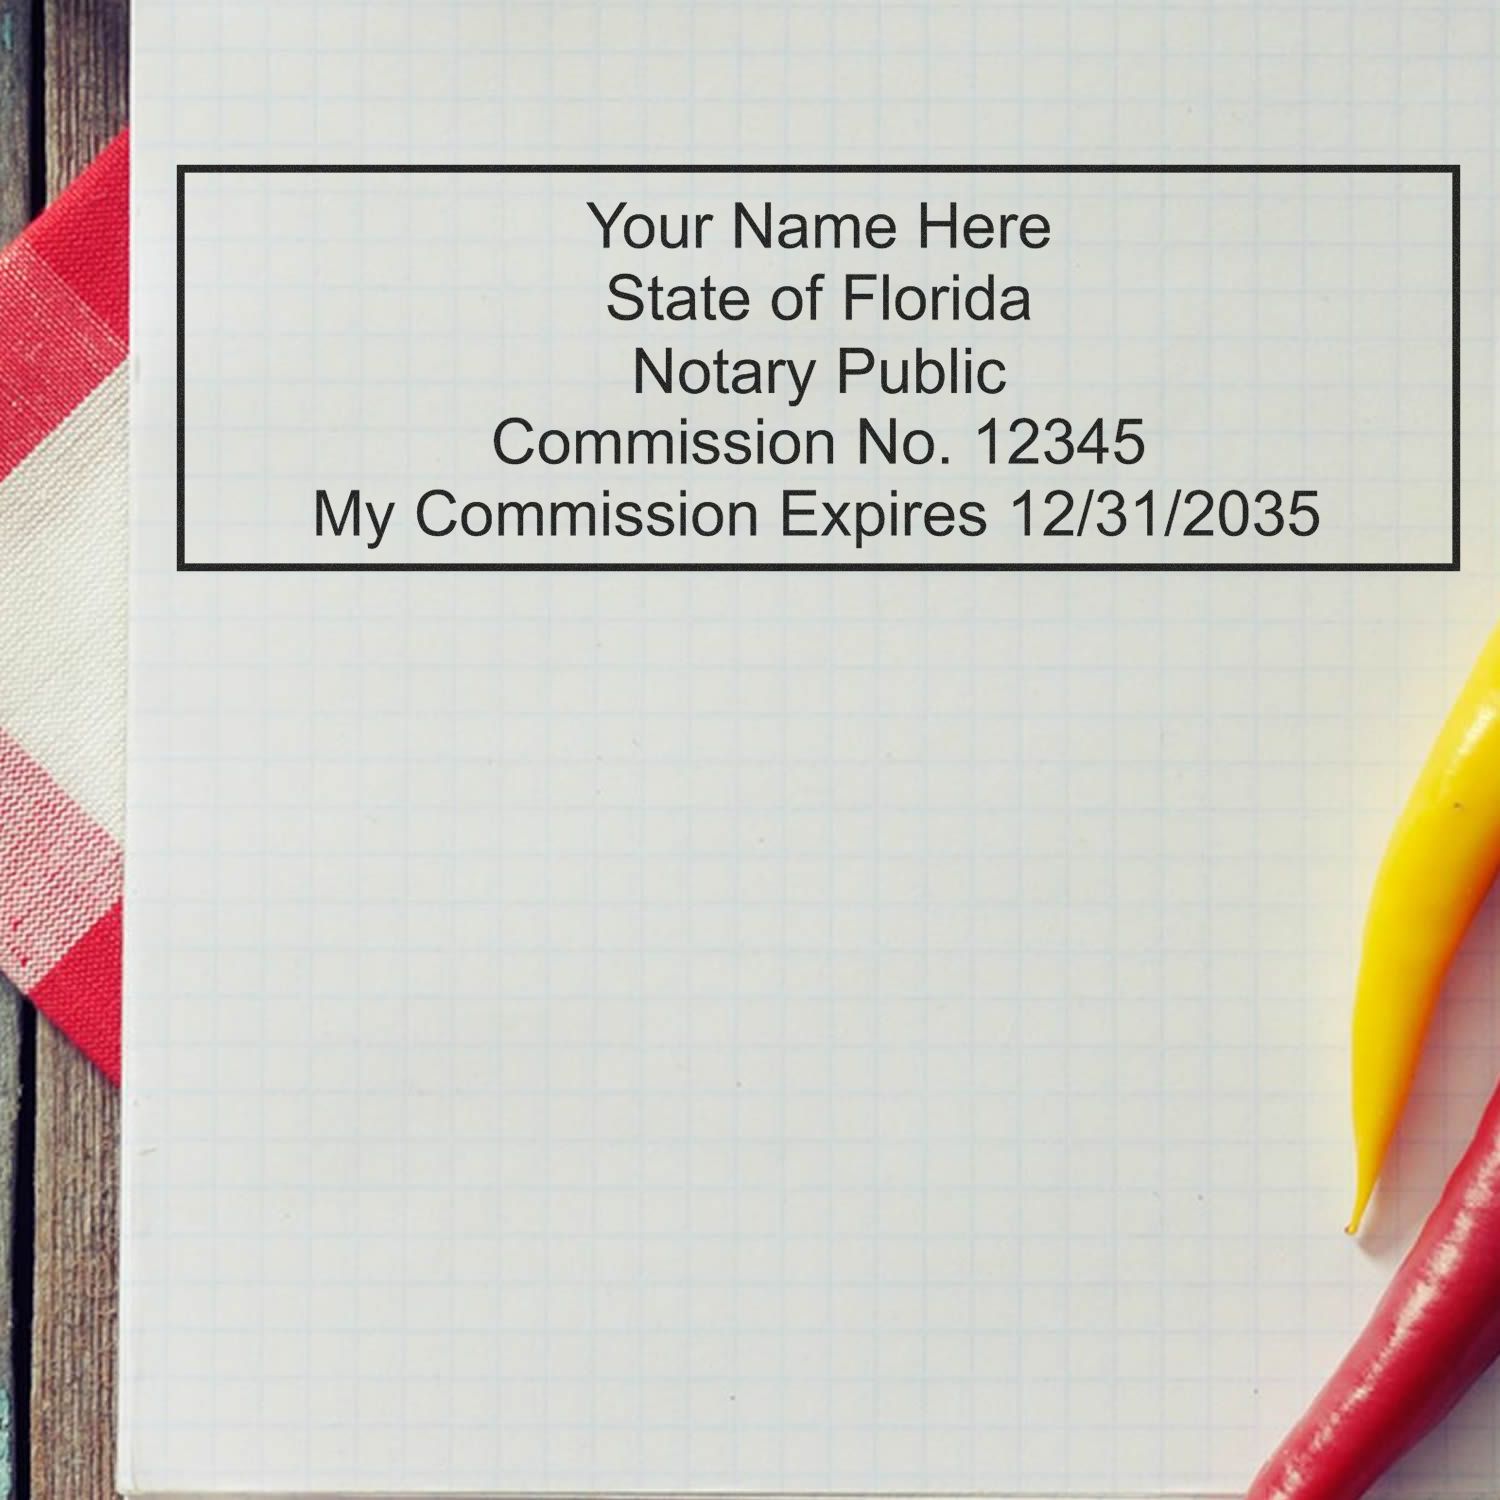 The main image for the PSI Florida Notary Stamp depicting a sample of the imprint and electronic files